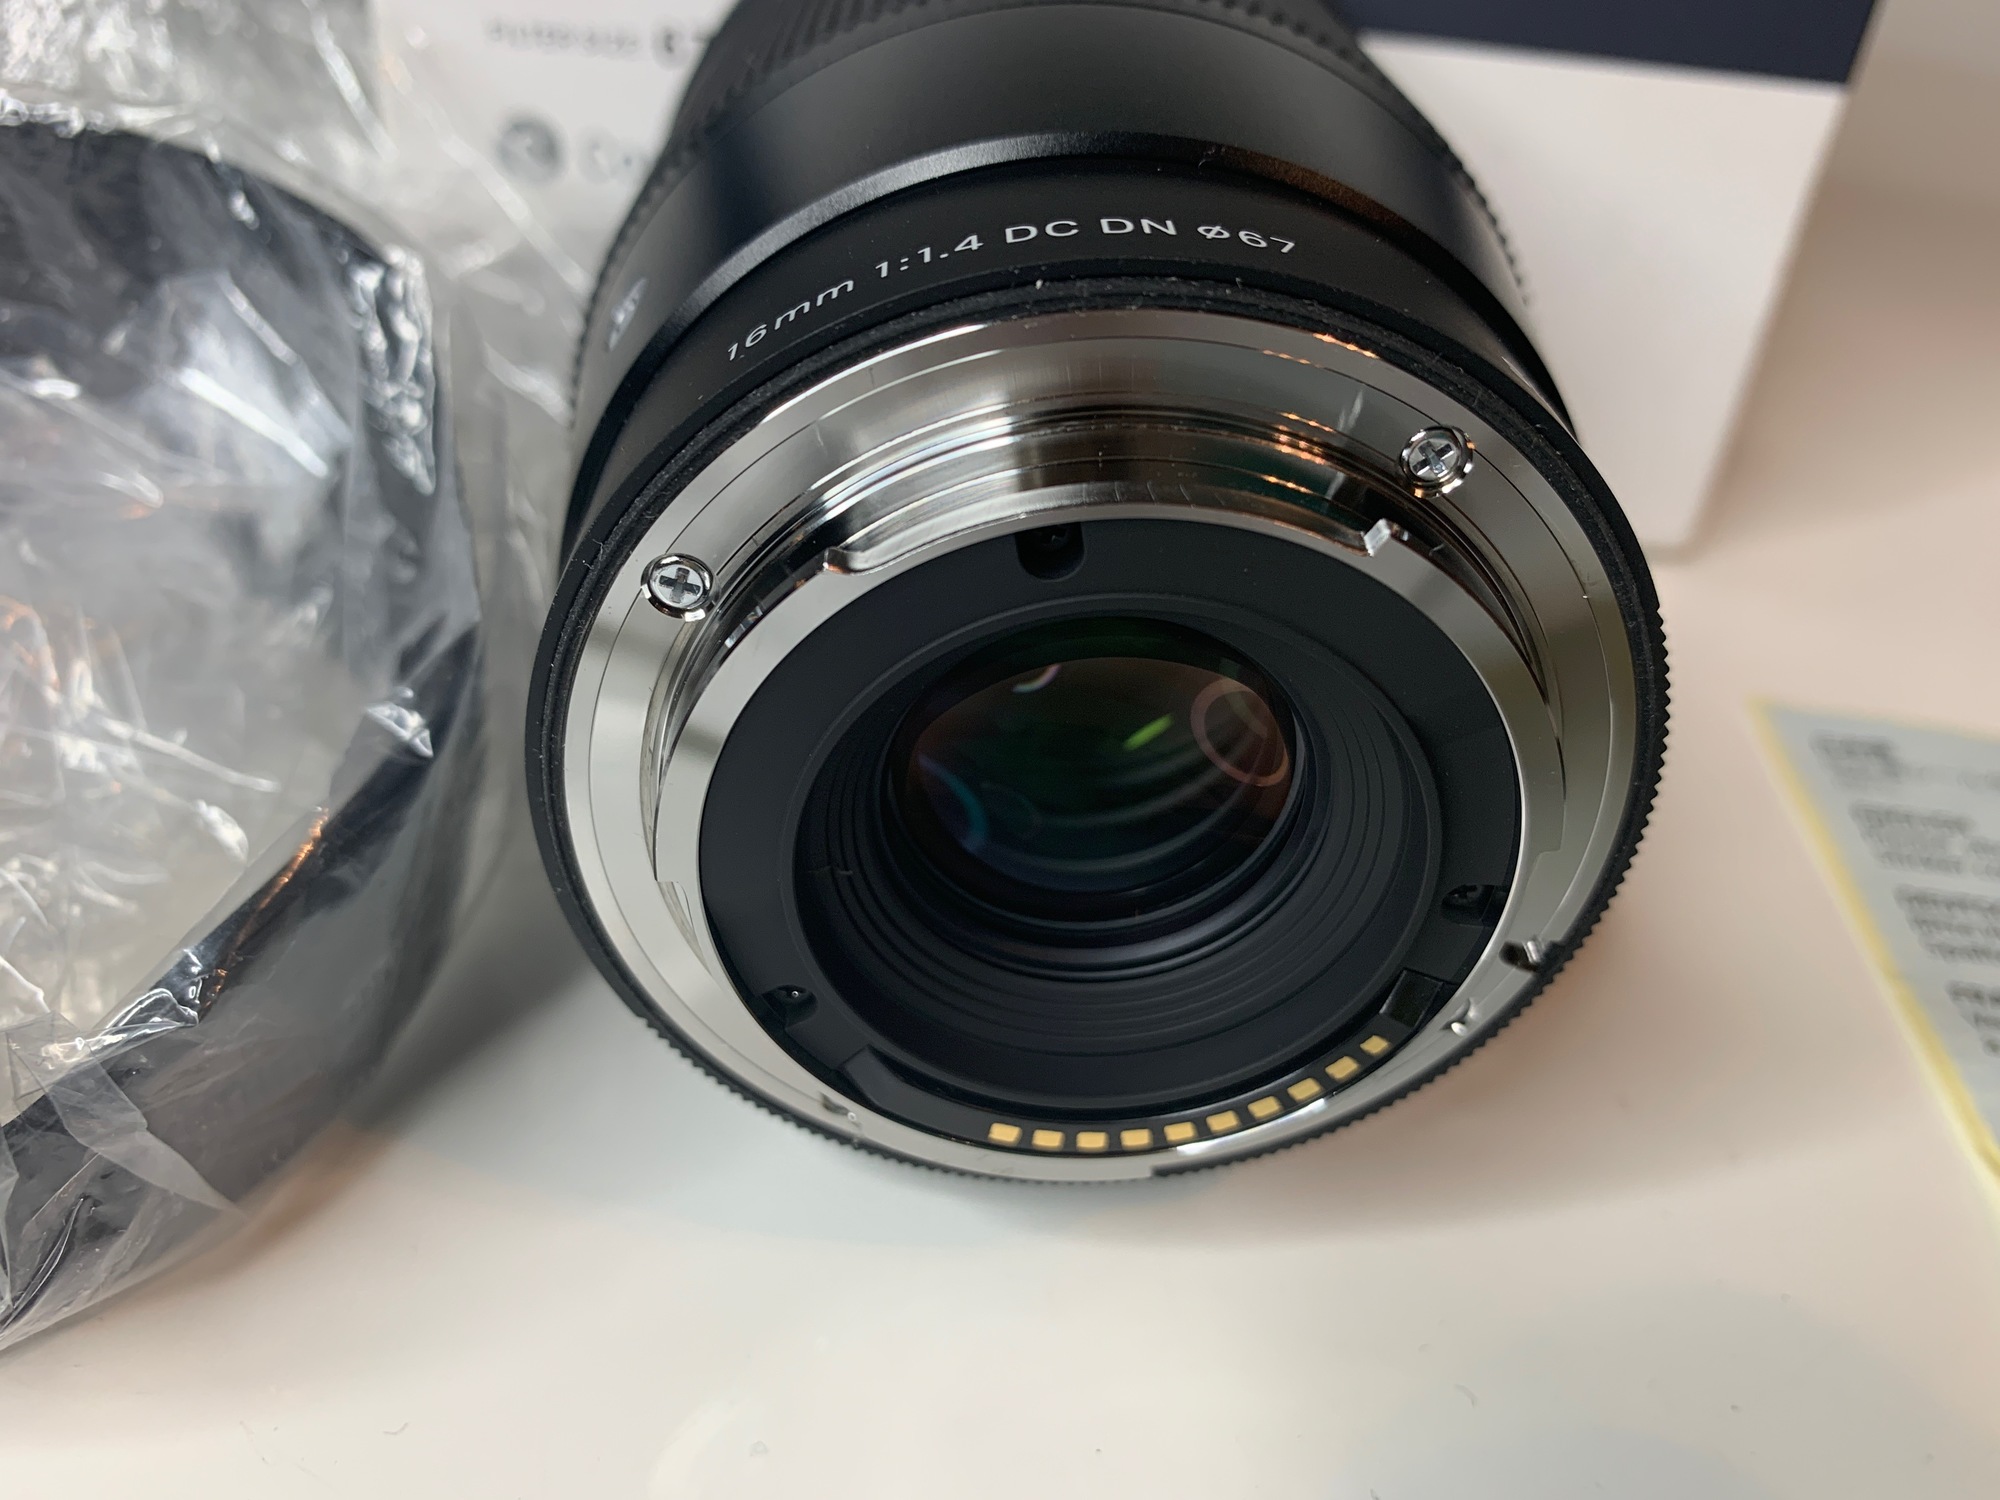 Sold Sony a7iii w/2870 kit lens. Also selling a Sigma